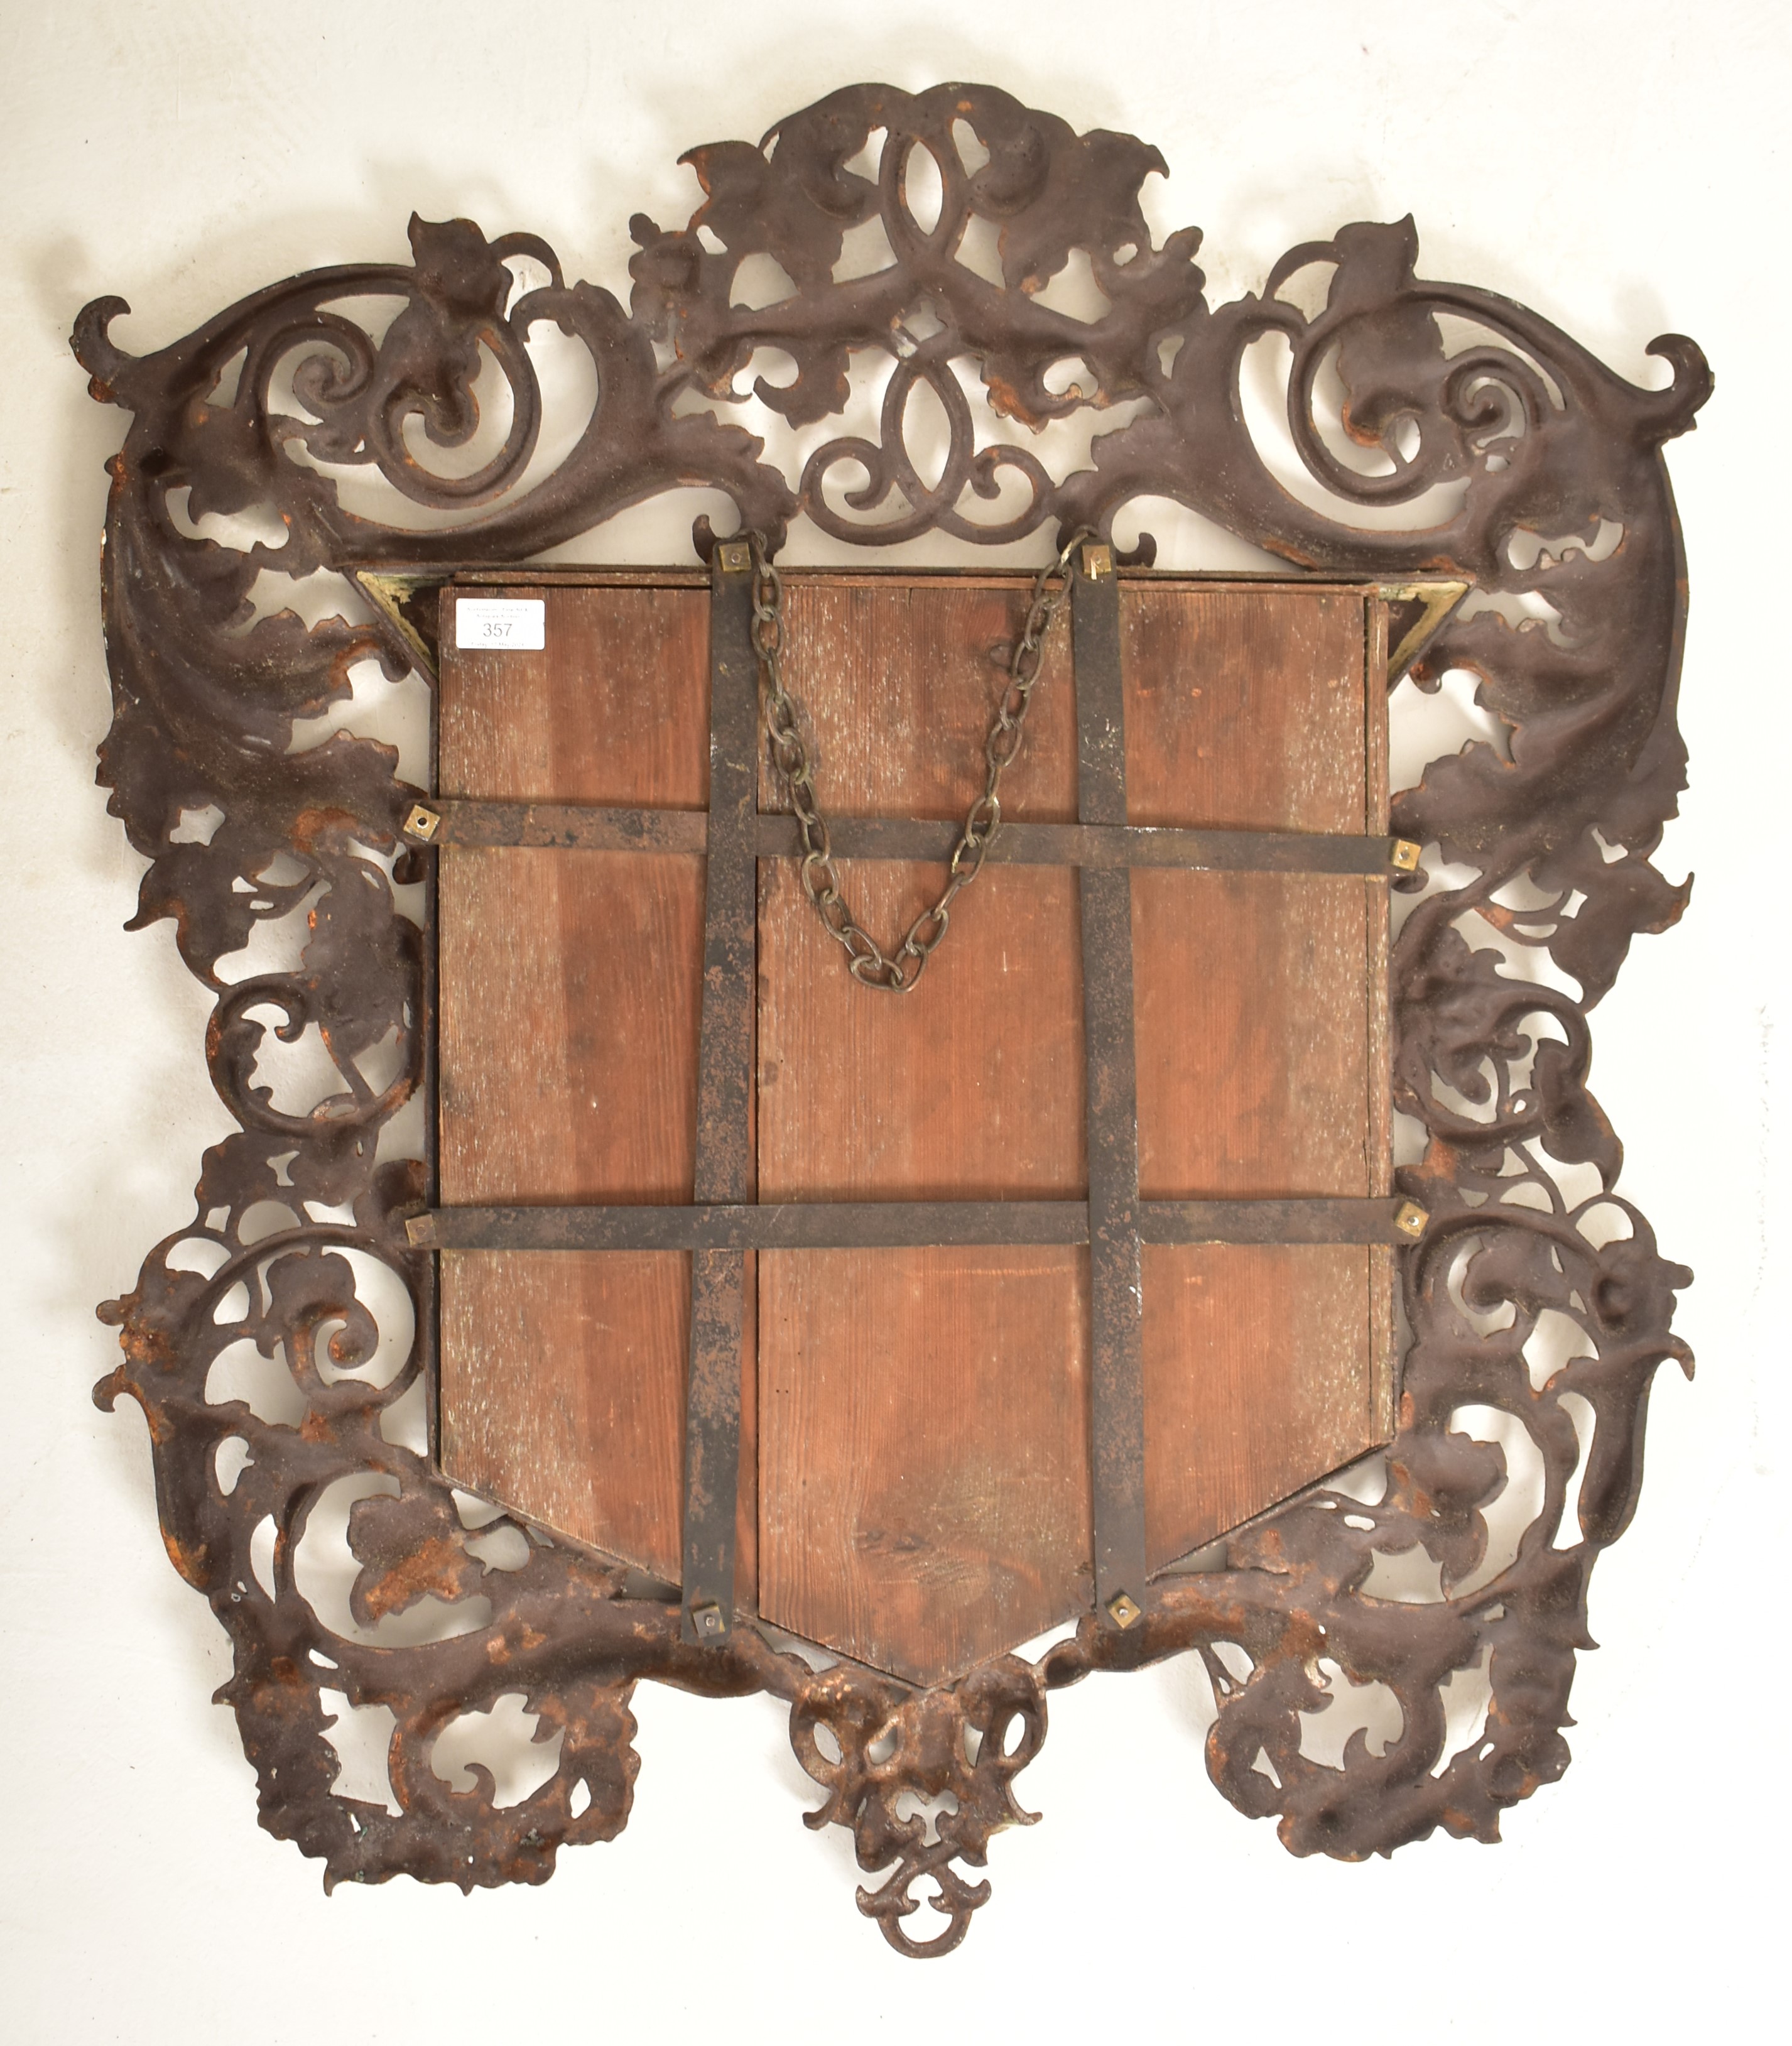 VICTORIAN ROCOCO STYLE CAST IRON WALL MIRROR - Image 4 of 4